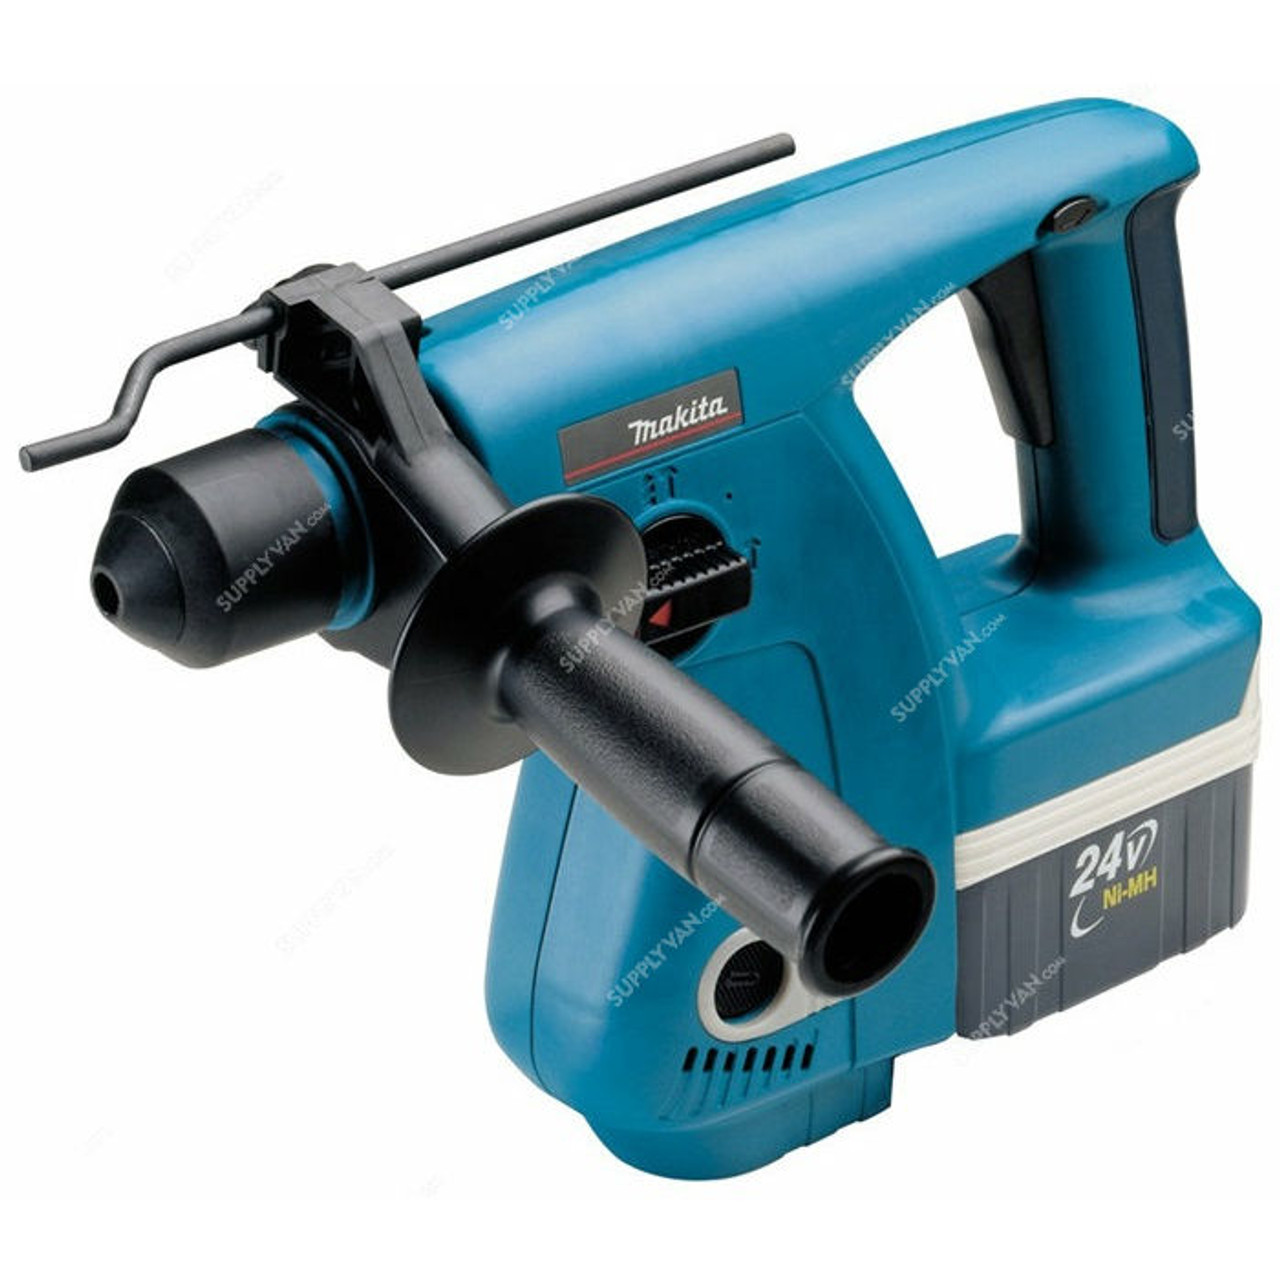 Makita Cordless Hammer Drill With Case BHR200SJ SDS-Plus 20MM: Buy Online at Best Price in UAE - SupplyVan.com